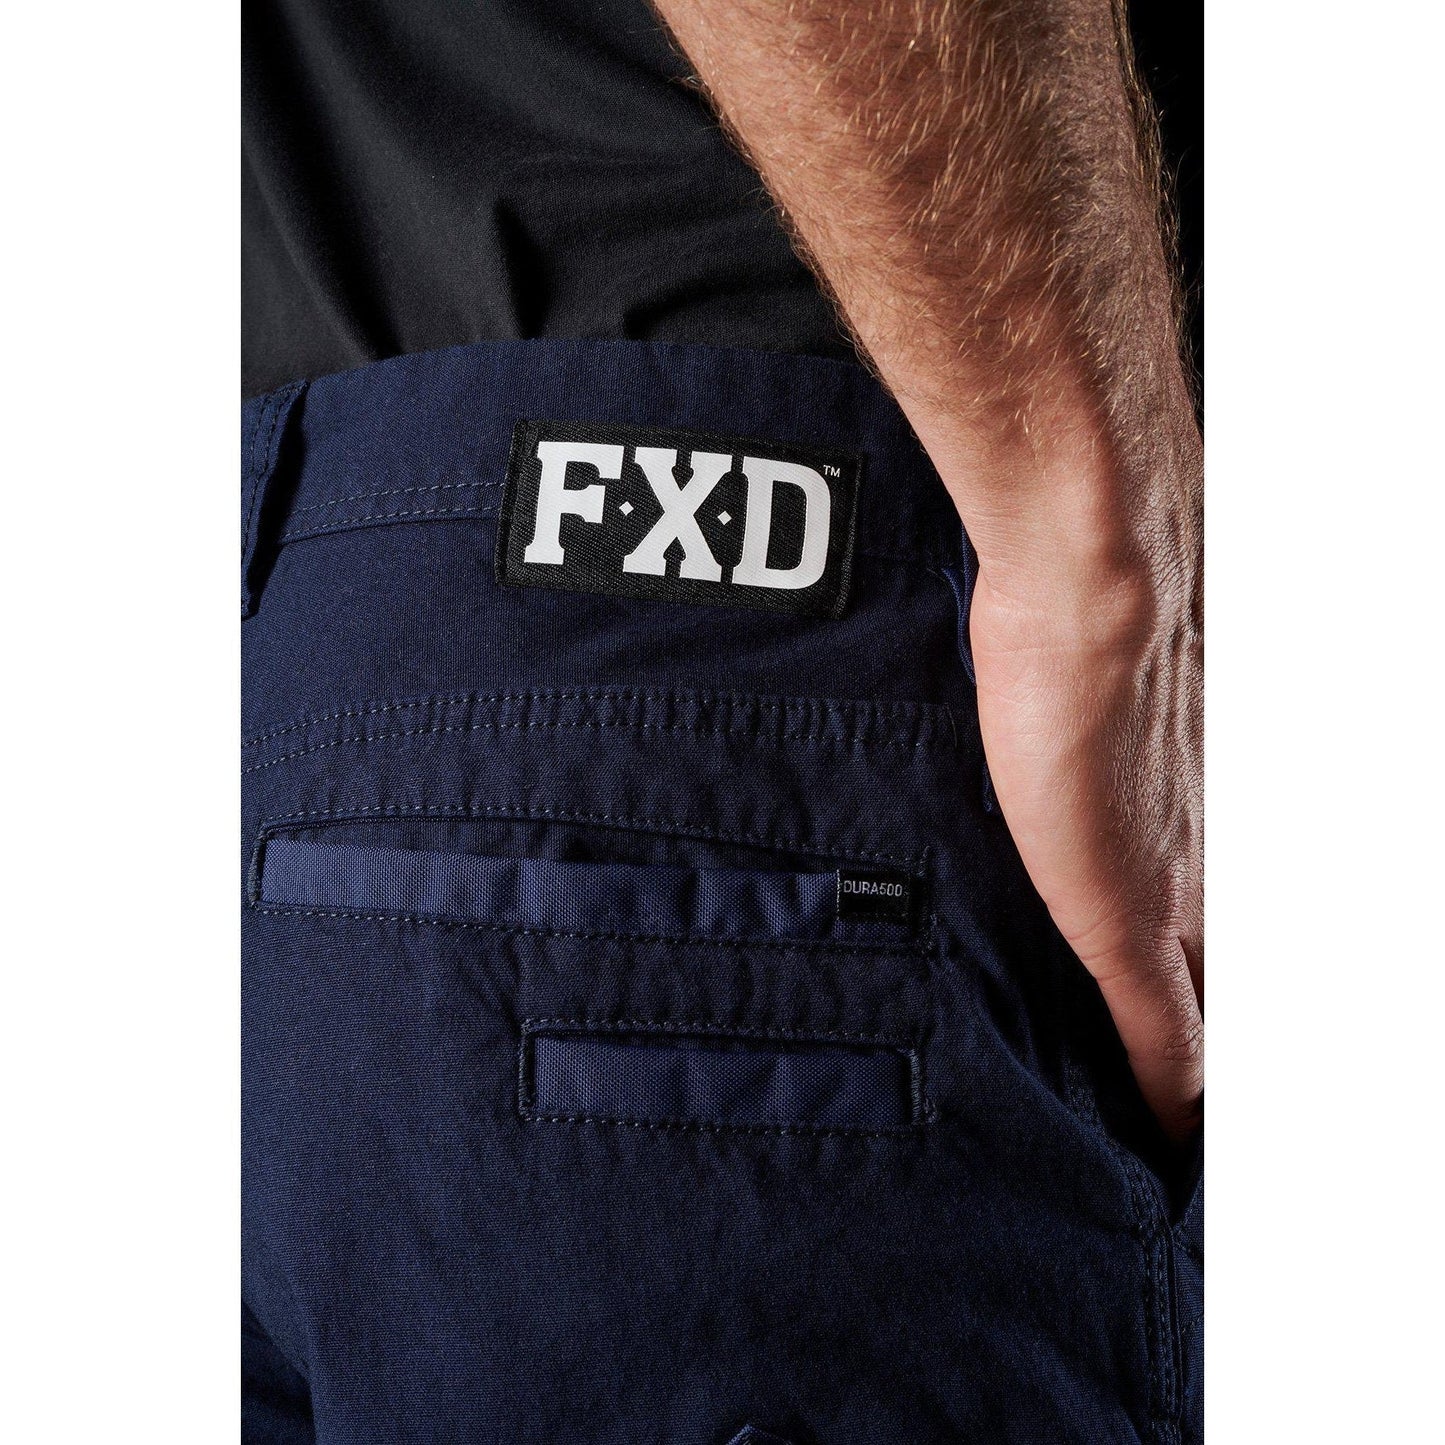 FXD Work Pant Stretch - WP-3 | Blue Heeler Boots